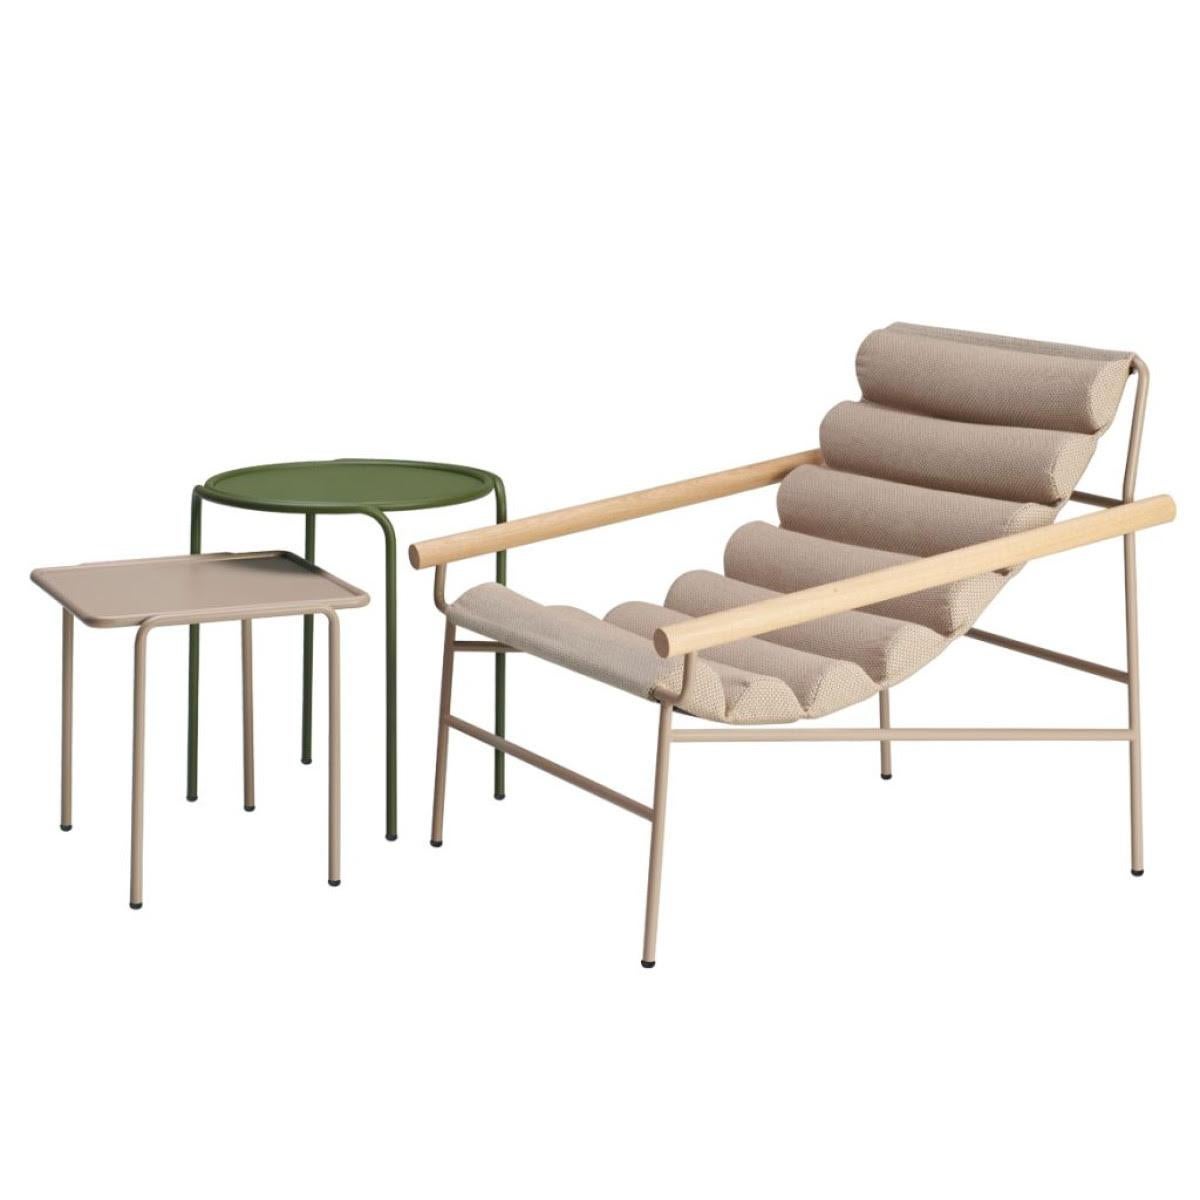 Wave-shaped Beige armchair
Beige Wave-shaped armchair with cylinder rollers on the back and seat. Very comfortable and original, it can decorate your garden or terrace.
Available in several colours.
This armchair is sold with a cover to protect